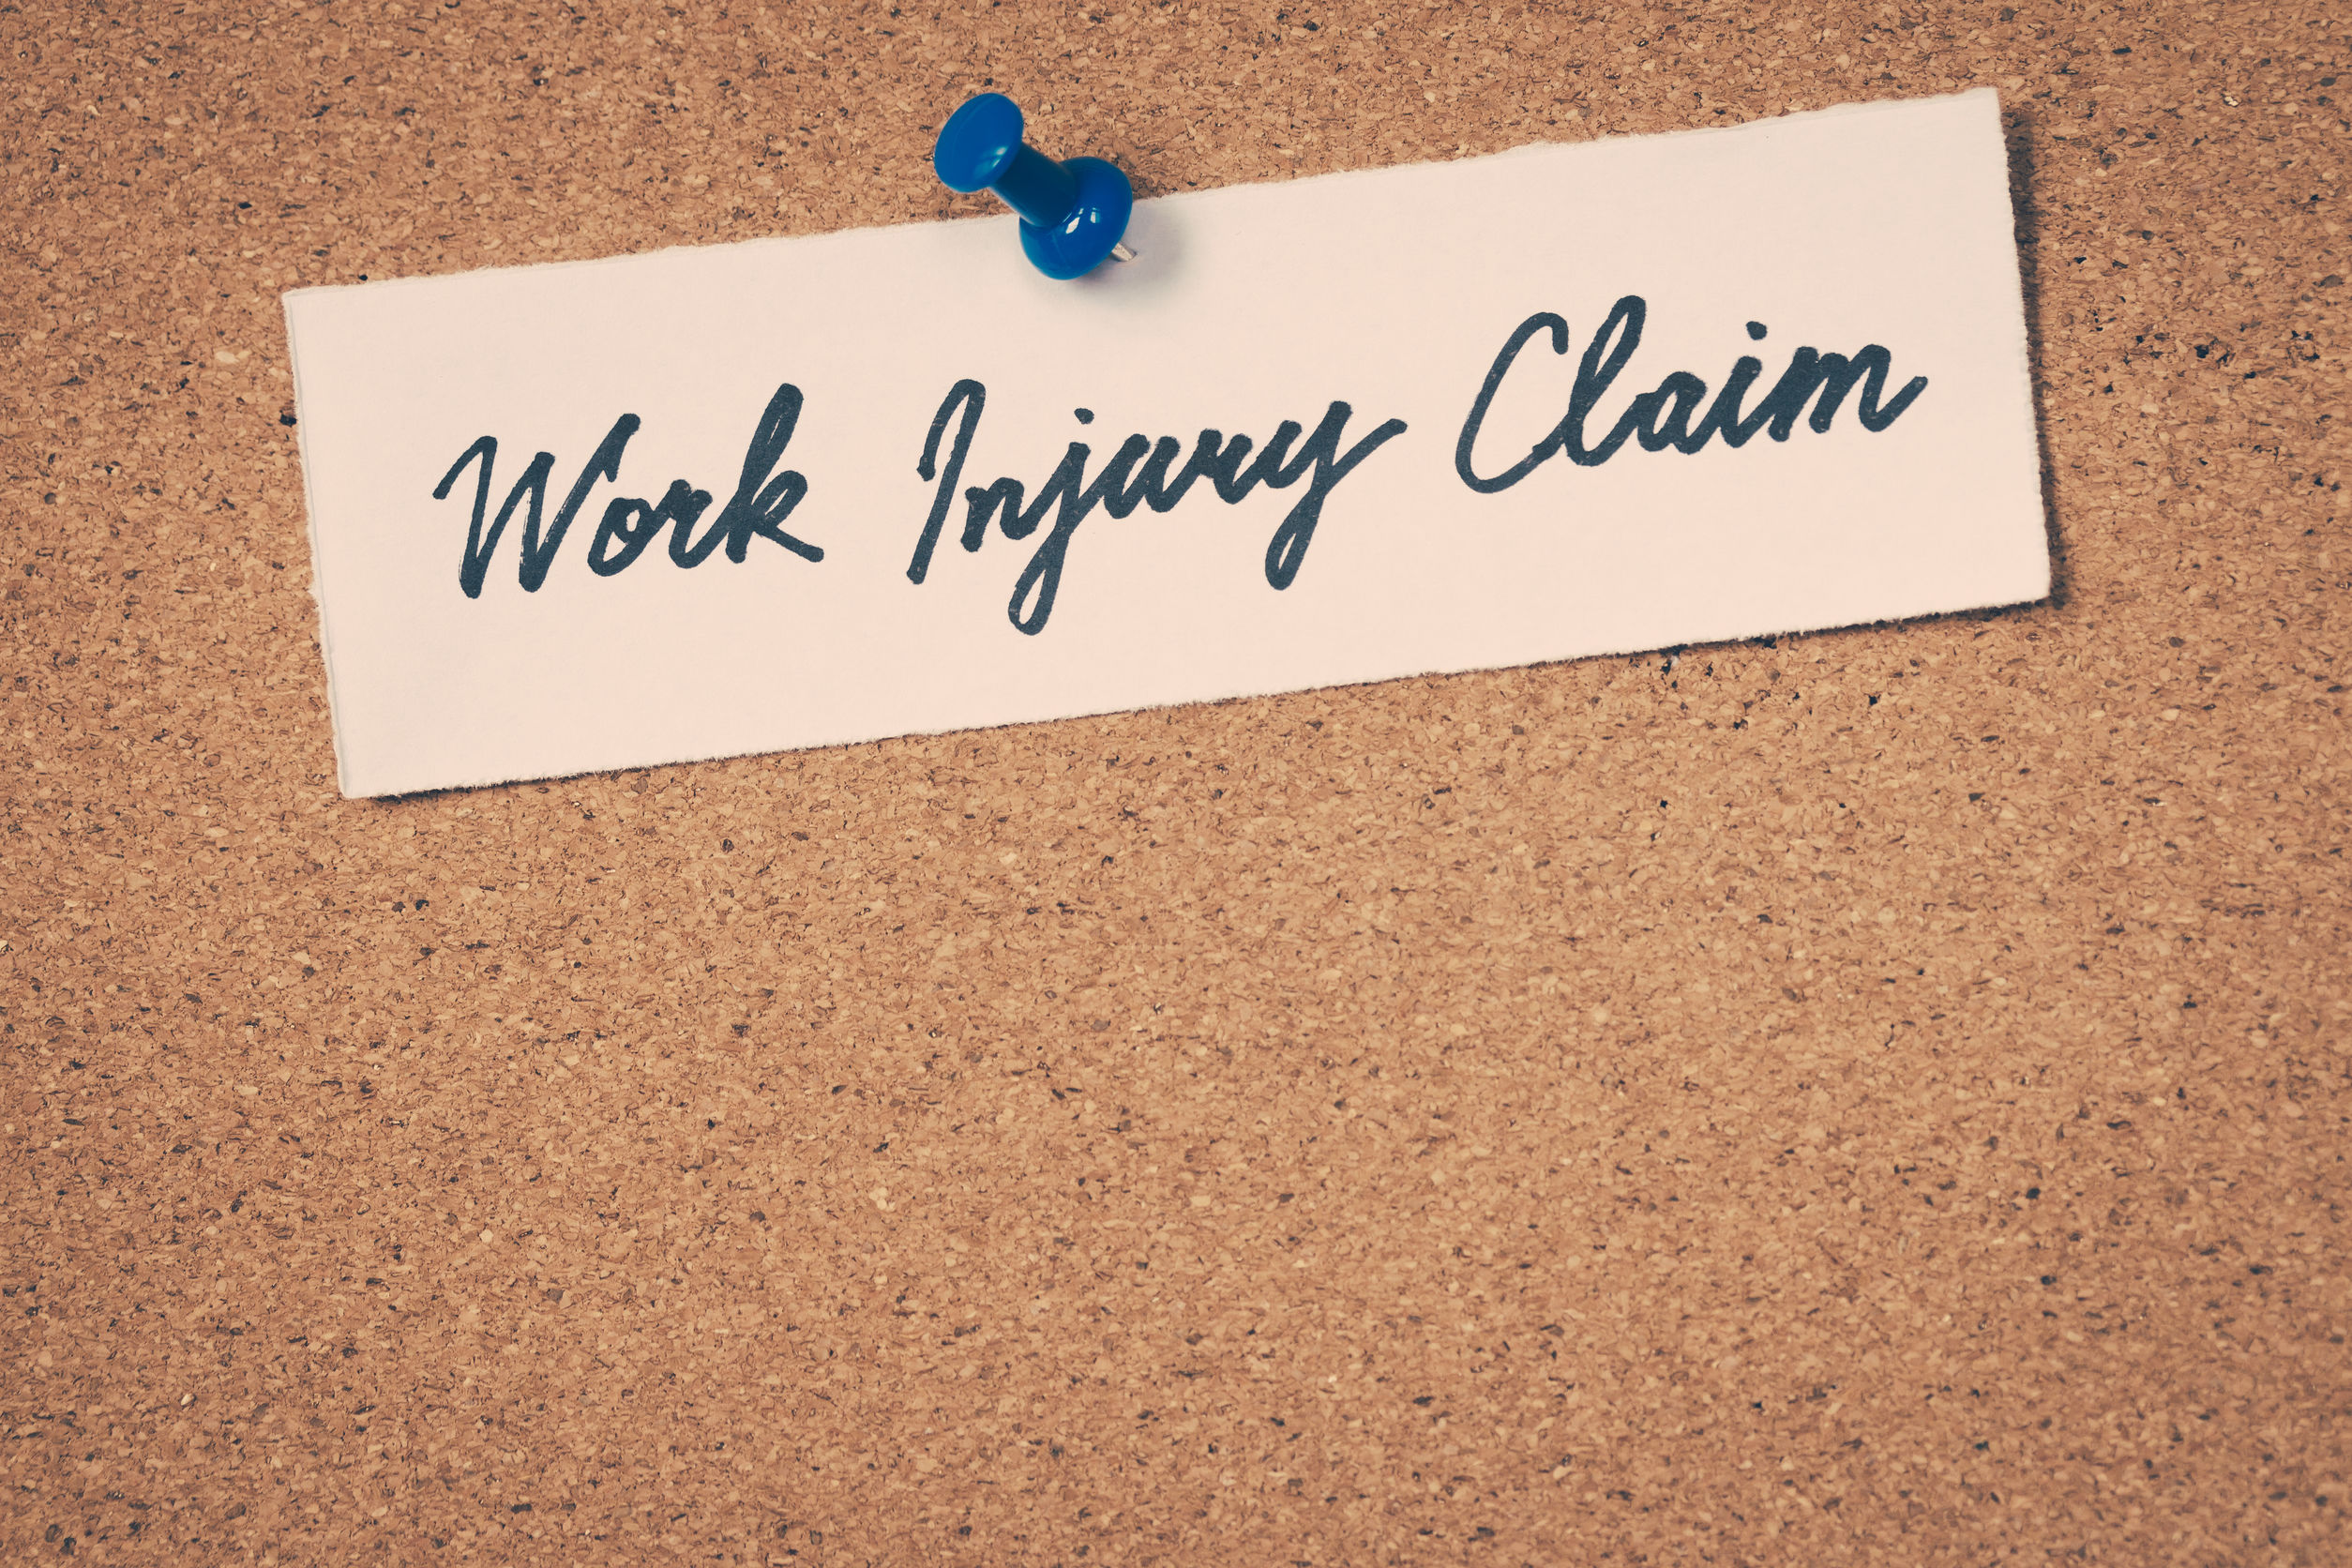 The words “work injury claim” represent employers’ need for answers to WV temporary total disability questions.